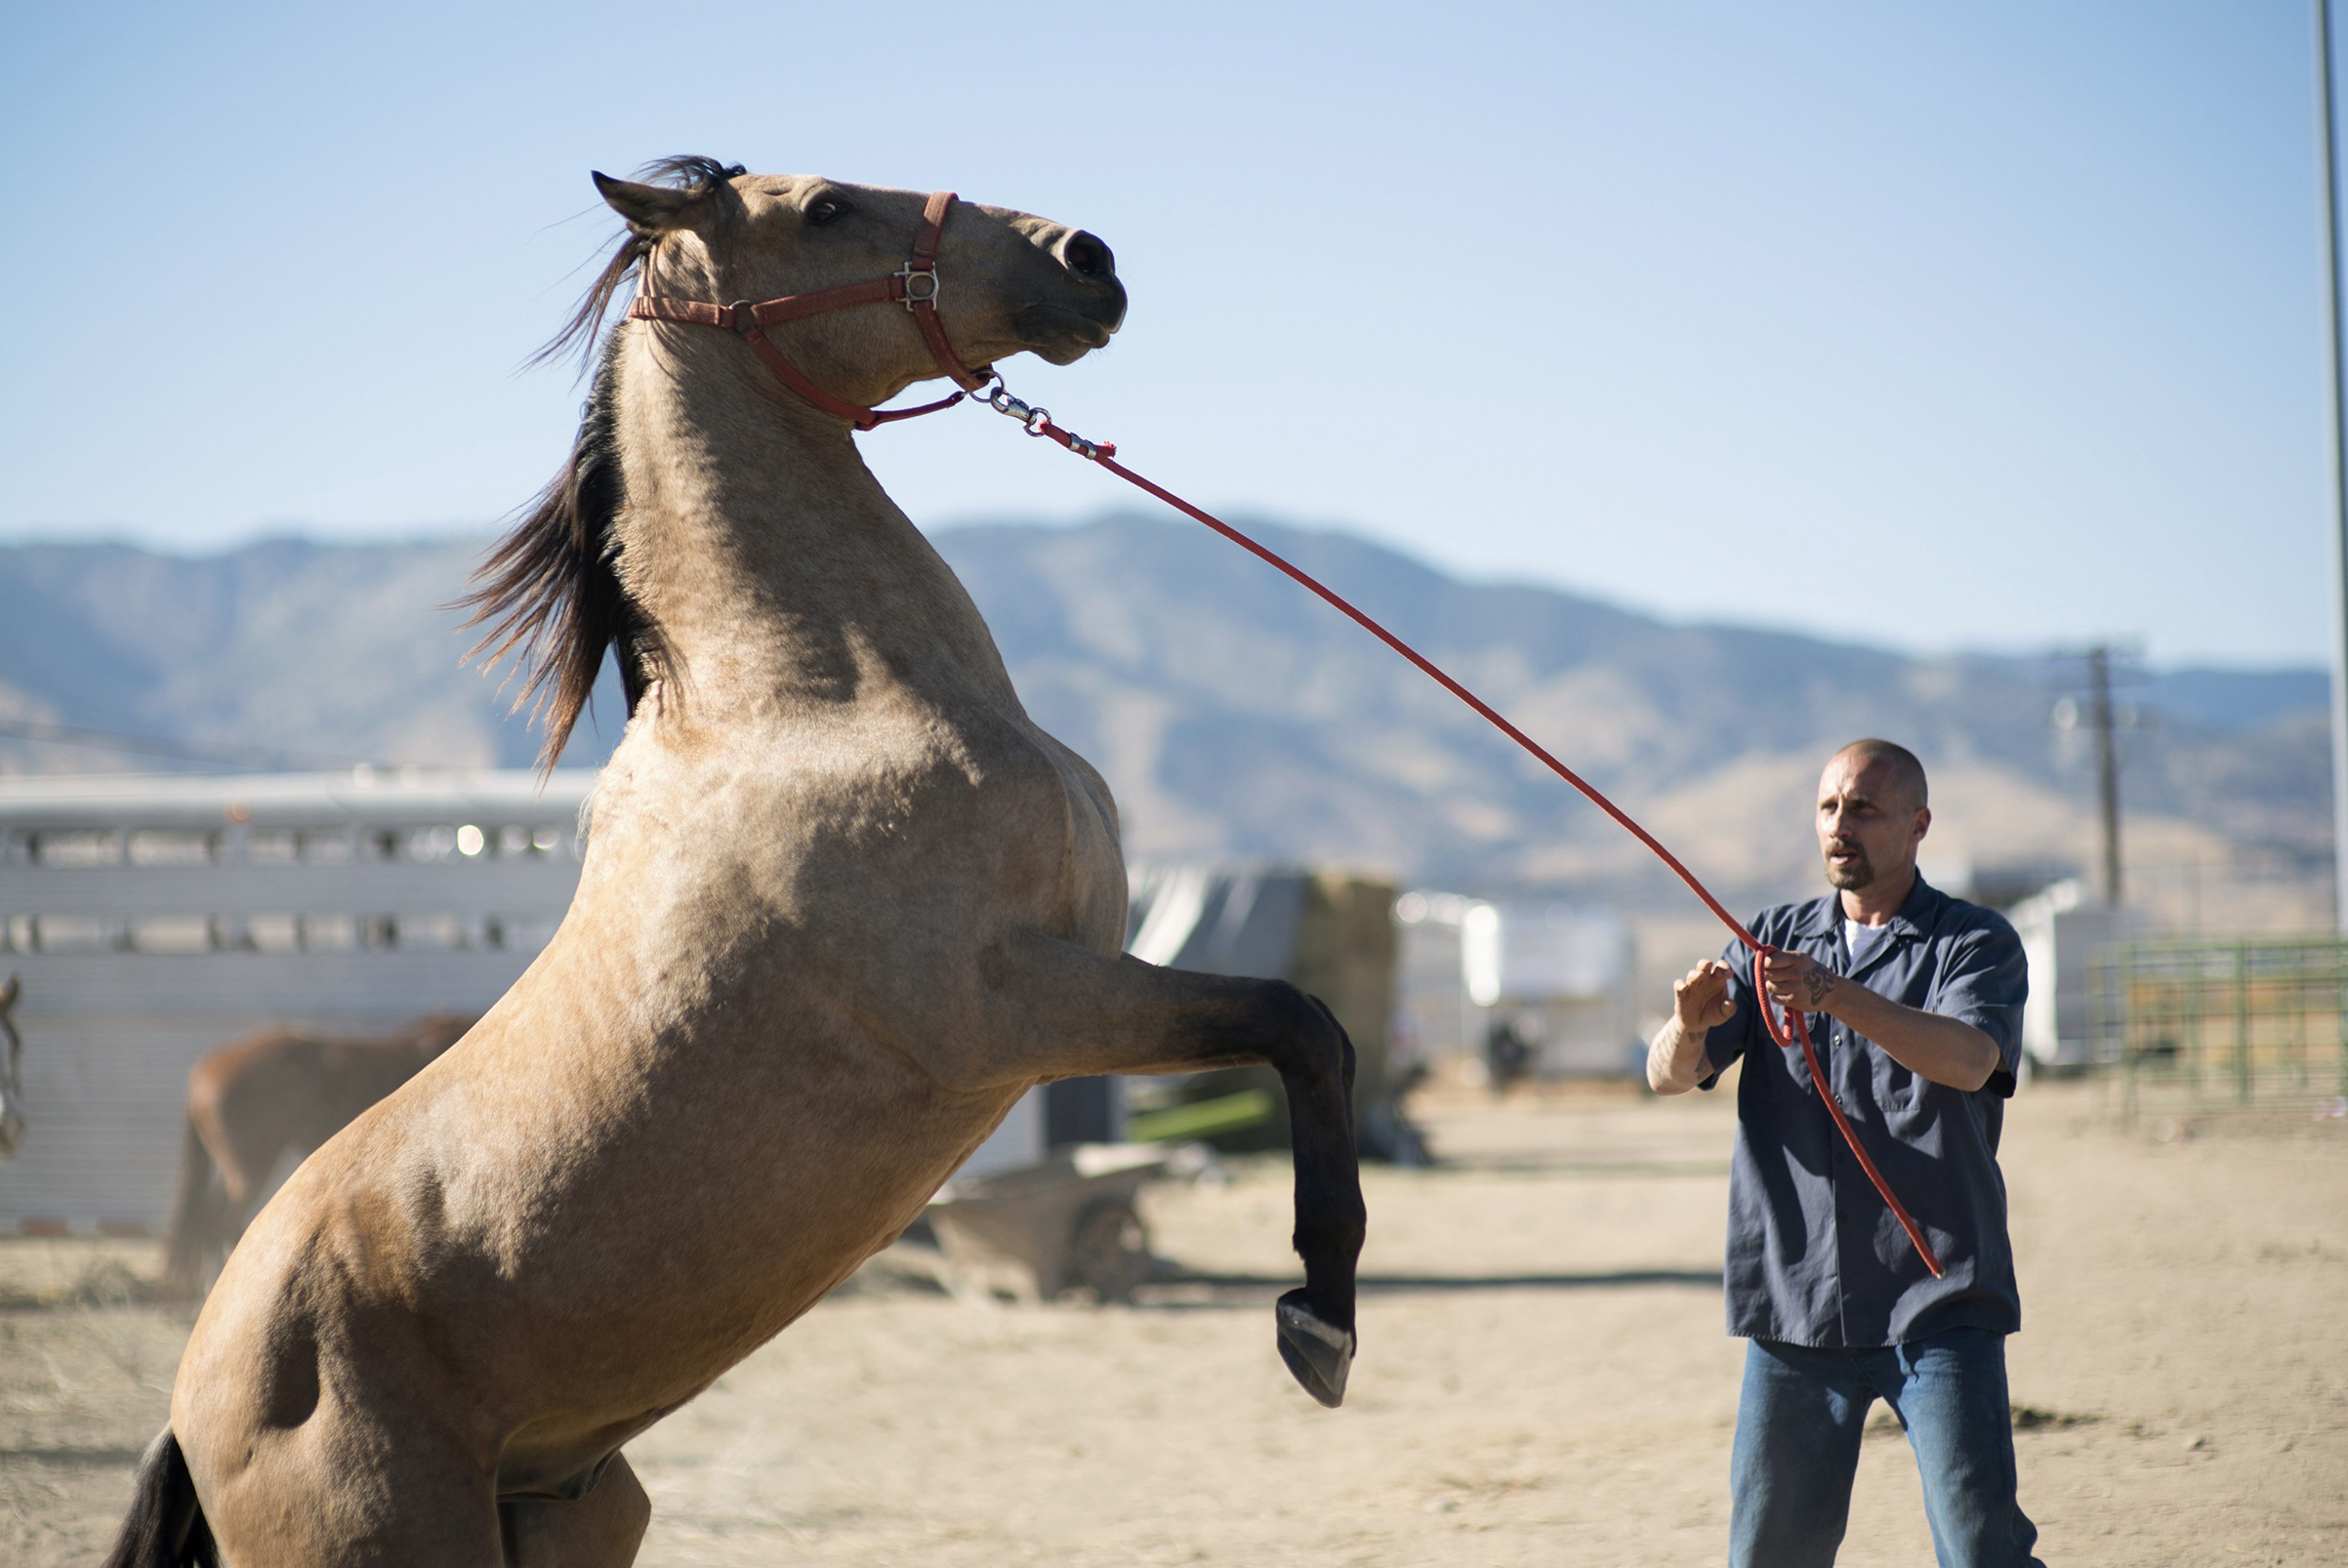 Easy does it for Schoenaerts and friend (Focus Features)